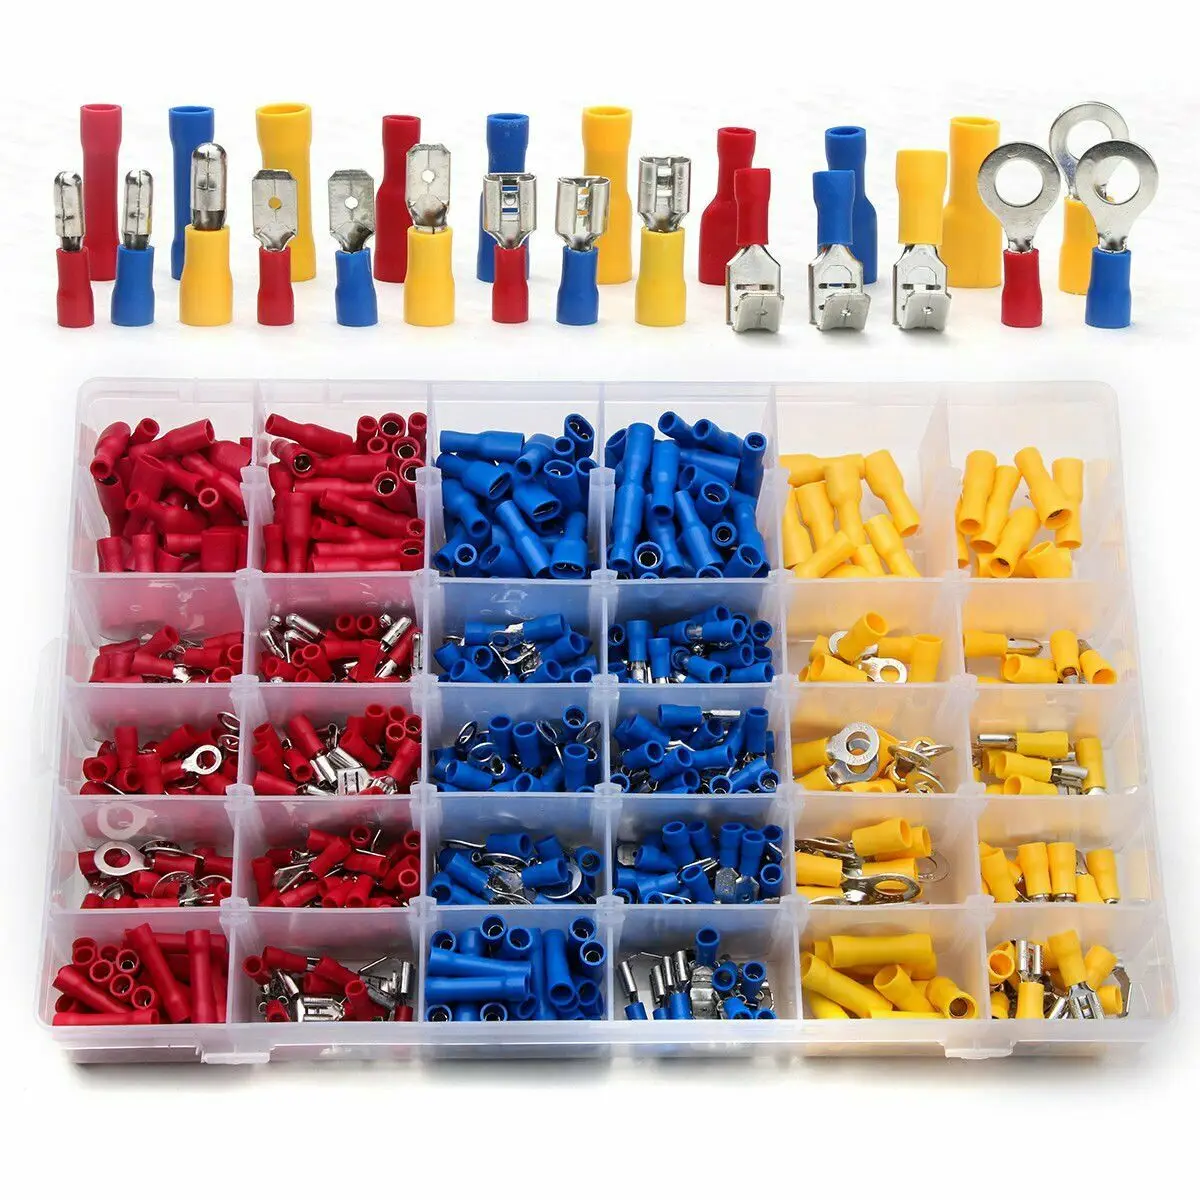 

720pcs Electrical Wire Connector Assorted Insulated Crimp Terminal Spade Set Kit